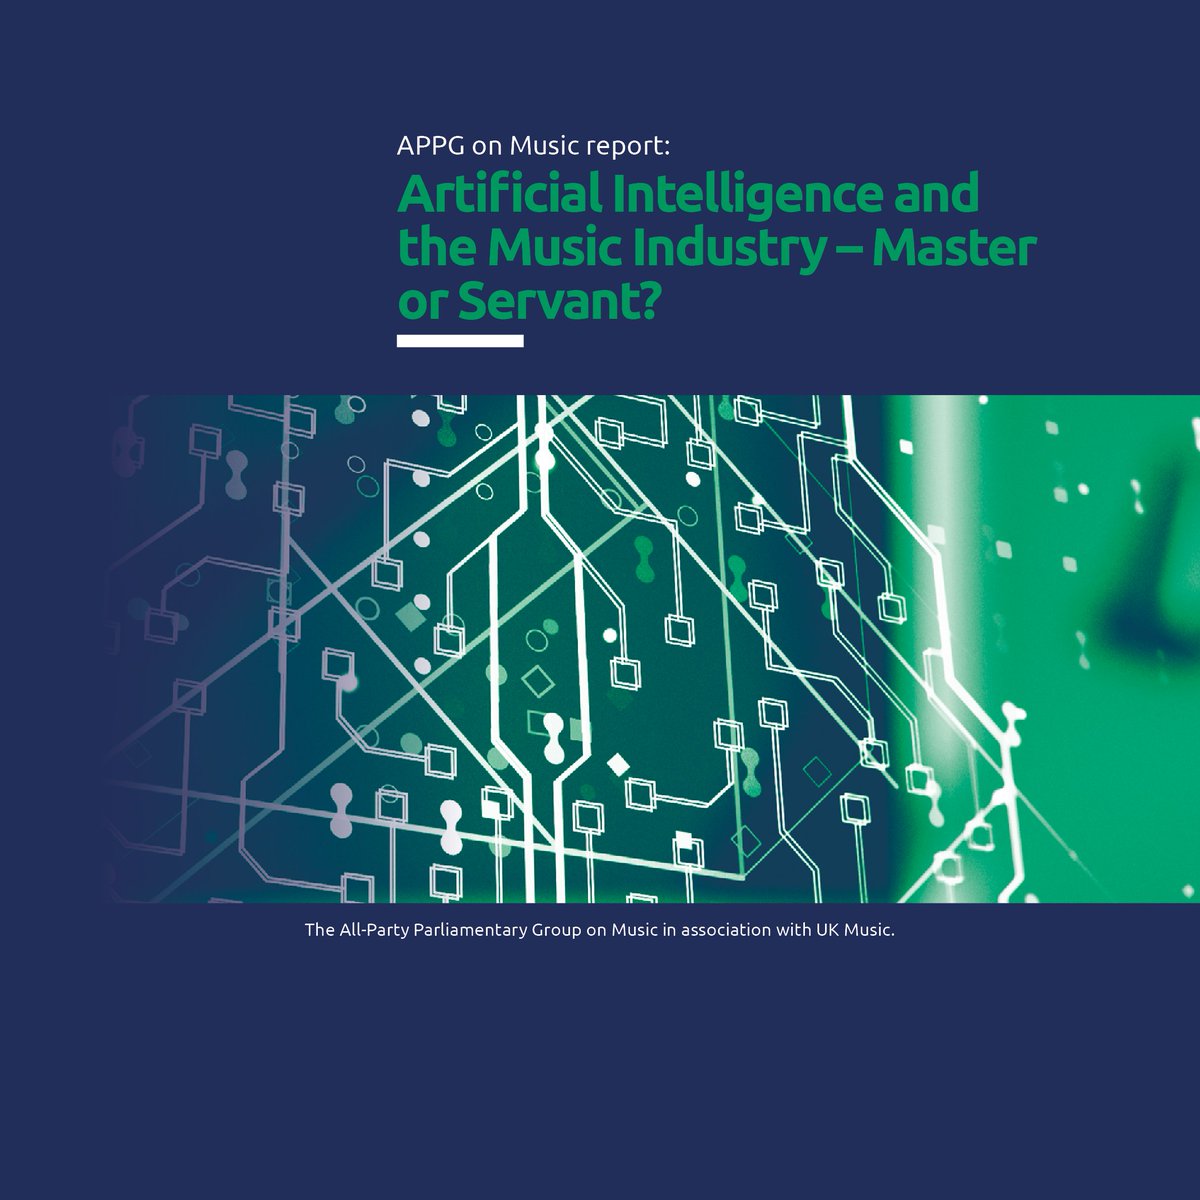 The All-Party Parliamentary Group on Music, in association with @UK_Music, has today published a report on Artificial Intelligence and the Music Industry. The report makes 8 key recommendations to the Government to help manage the threat of AI to the music industry 🧵A thread: